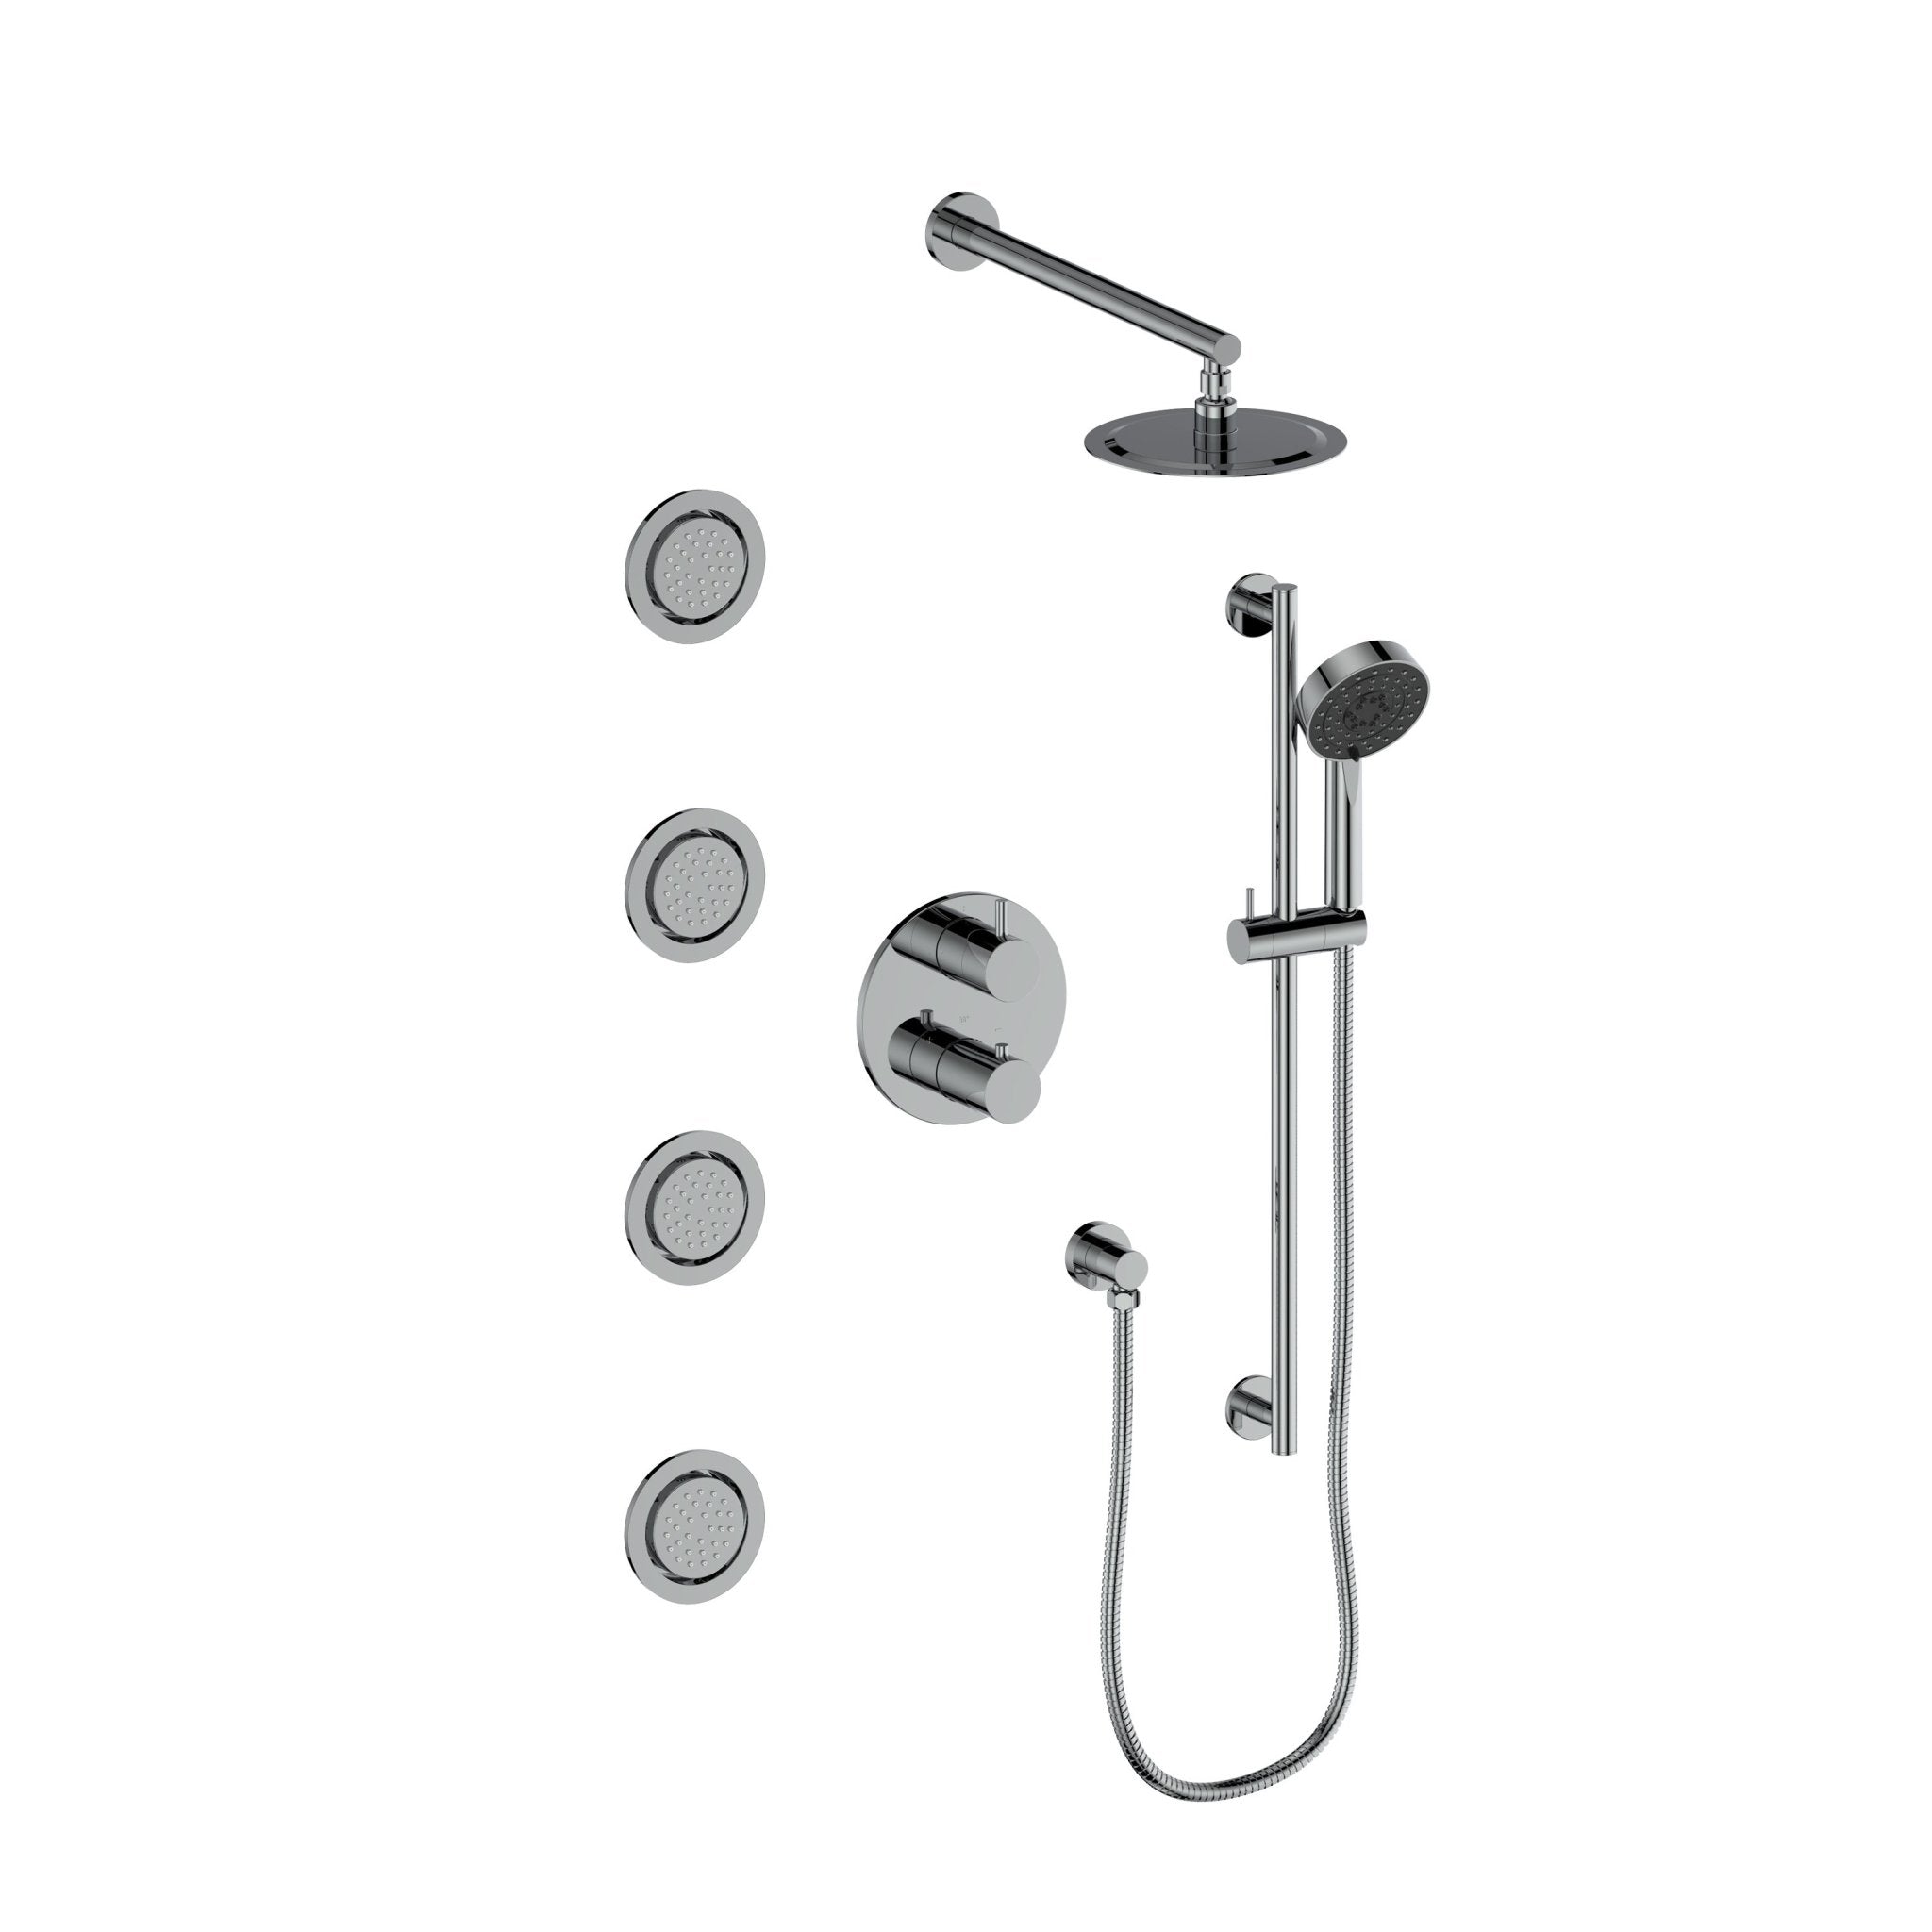 ZLINE Emerald Bay Thermostatic Shower System with Body Jets in Chrome (EMBY-SHS-T3-CH)